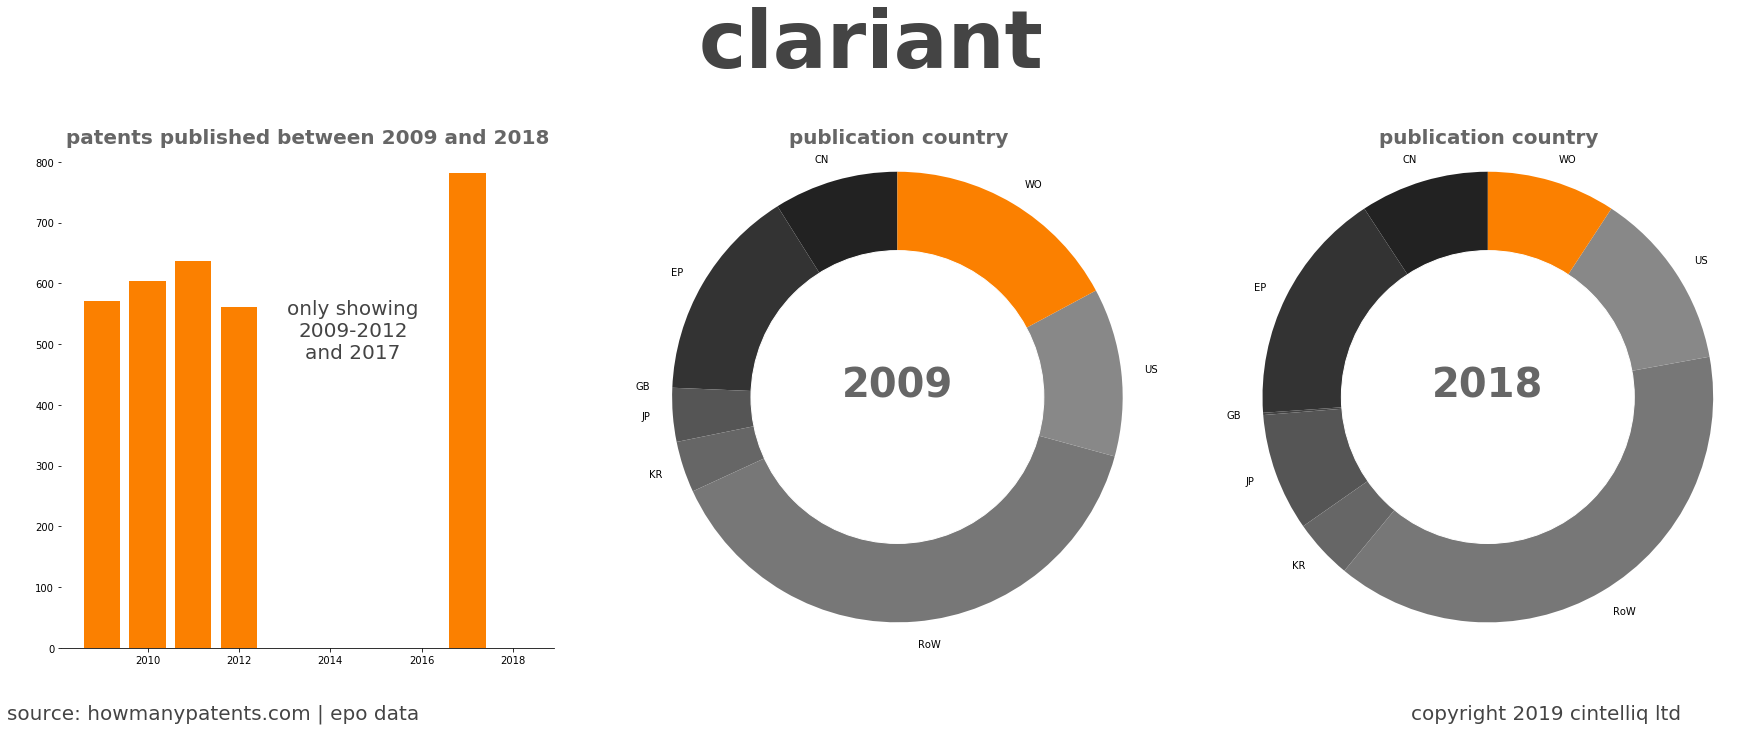 summary of patents for Clariant